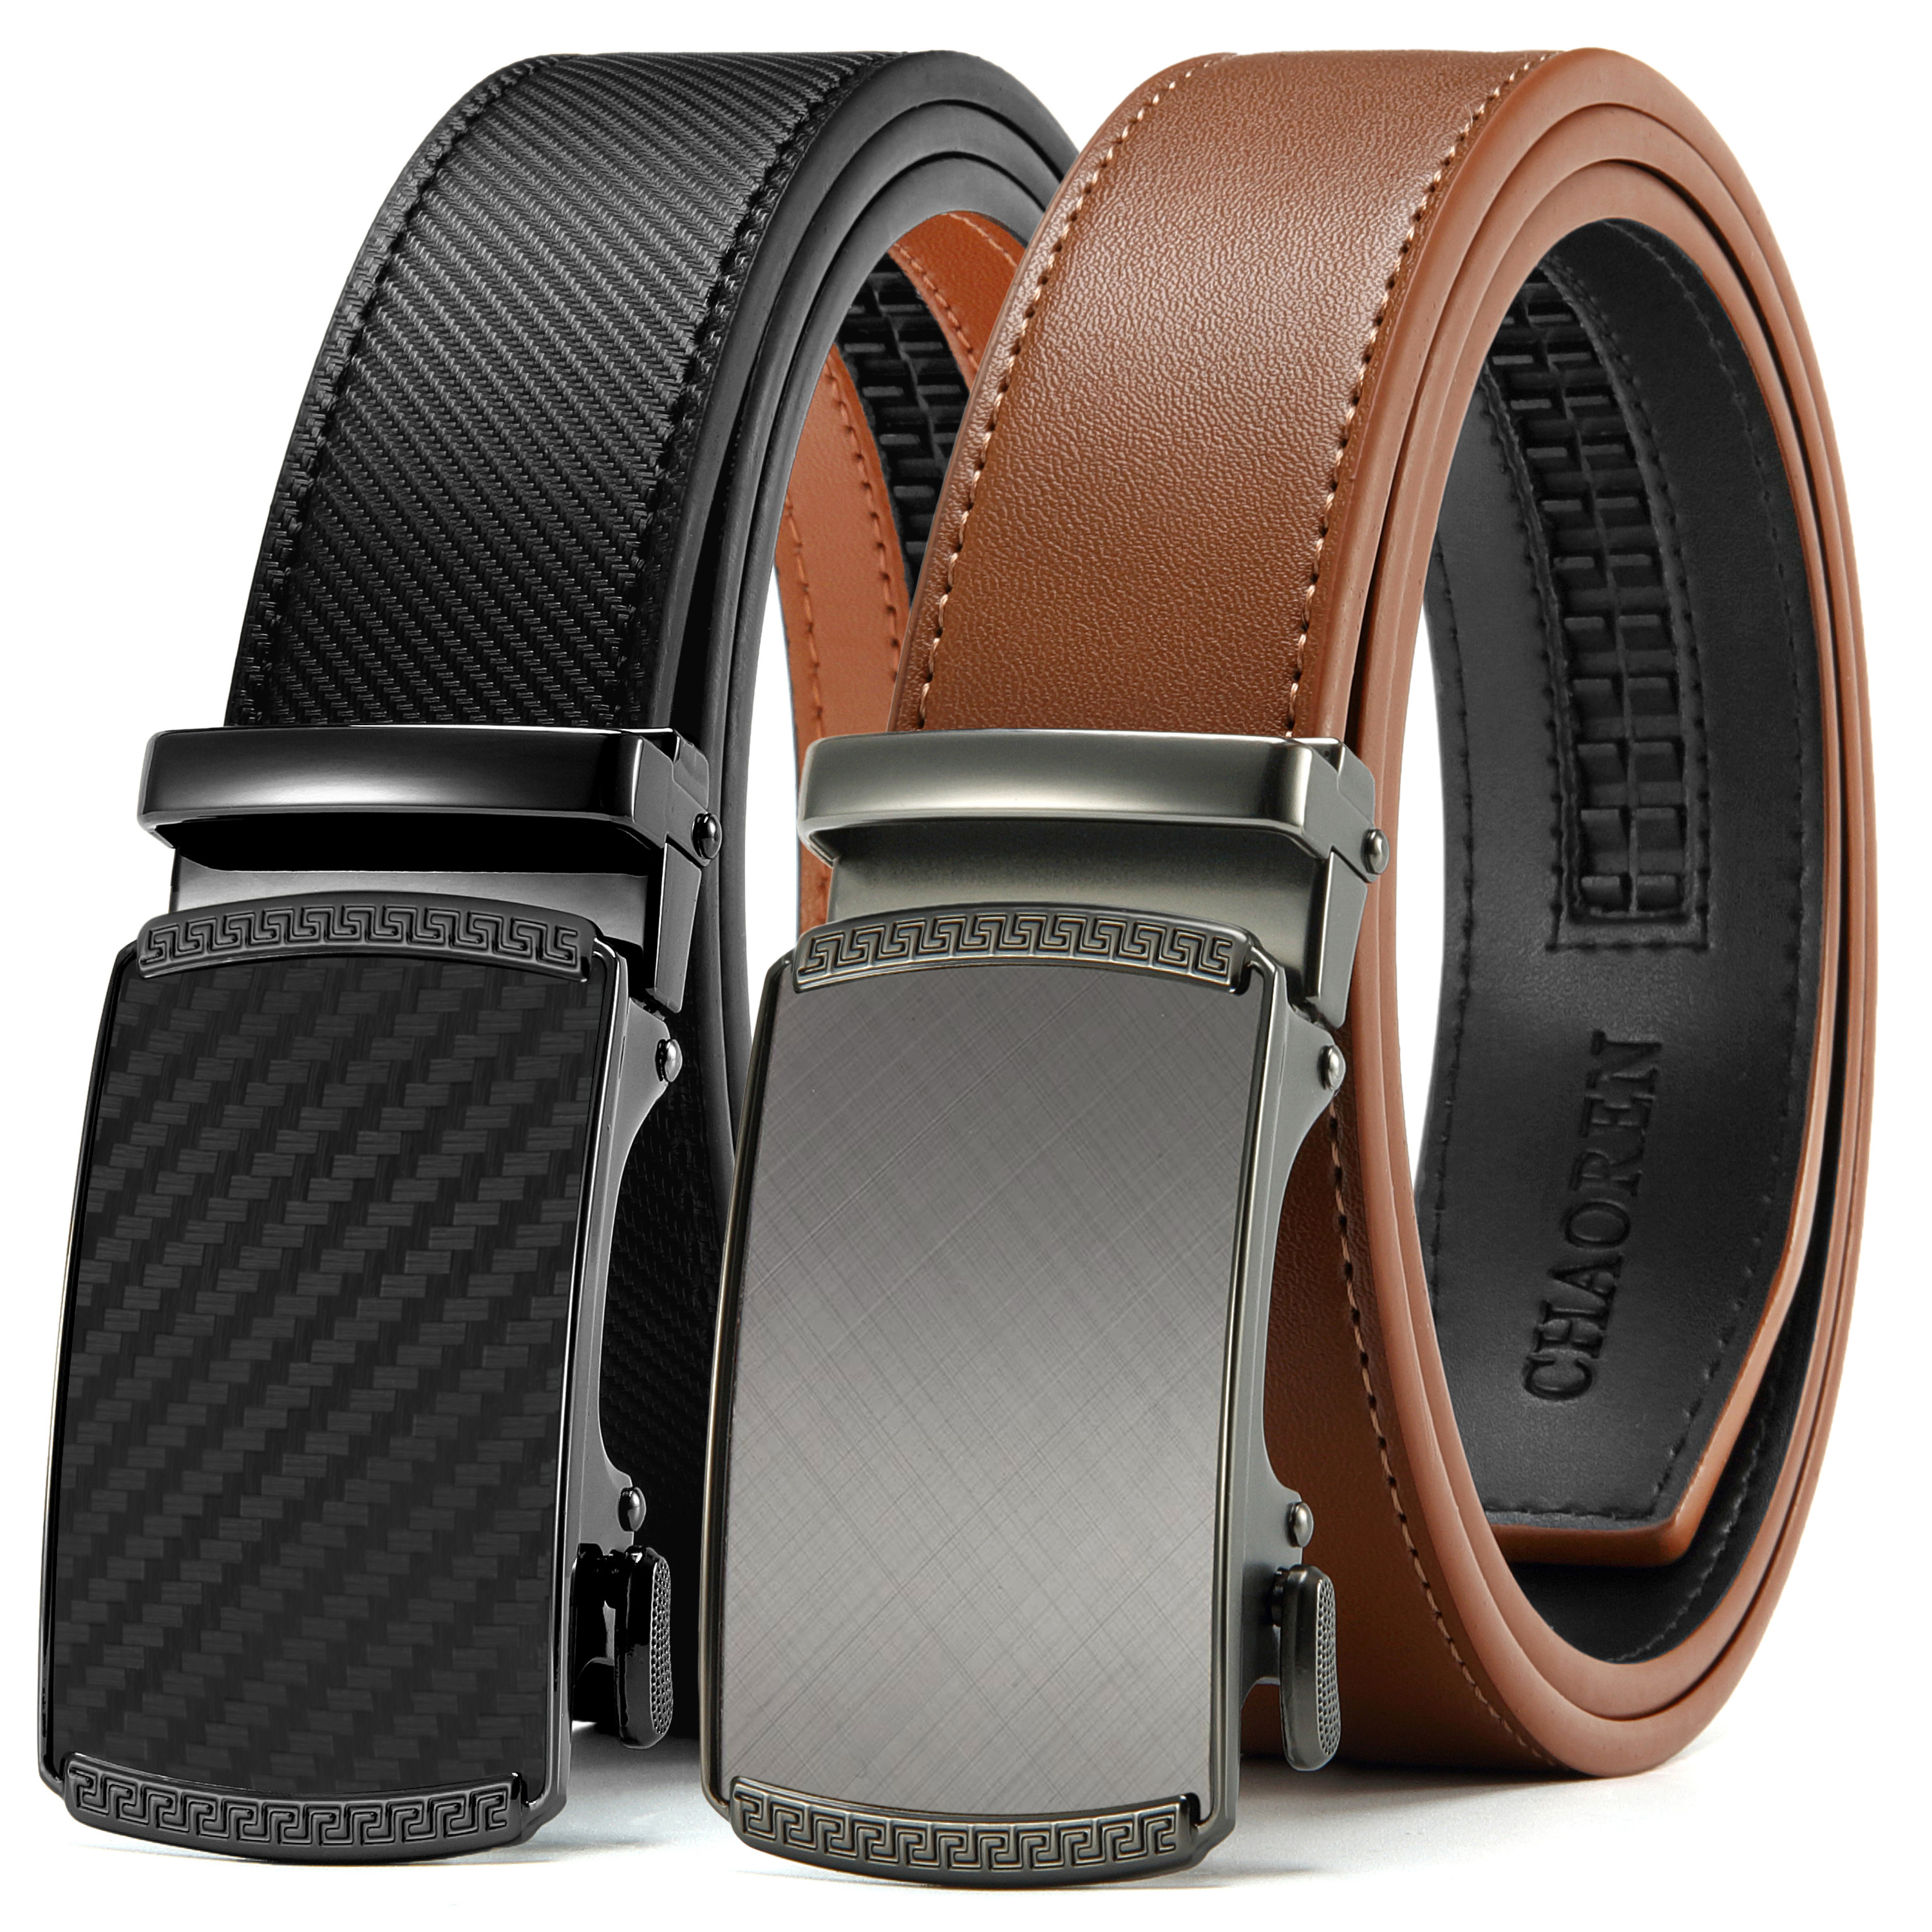 Chaoren Leather Ratchet Dress Belt, with Automatic Slide